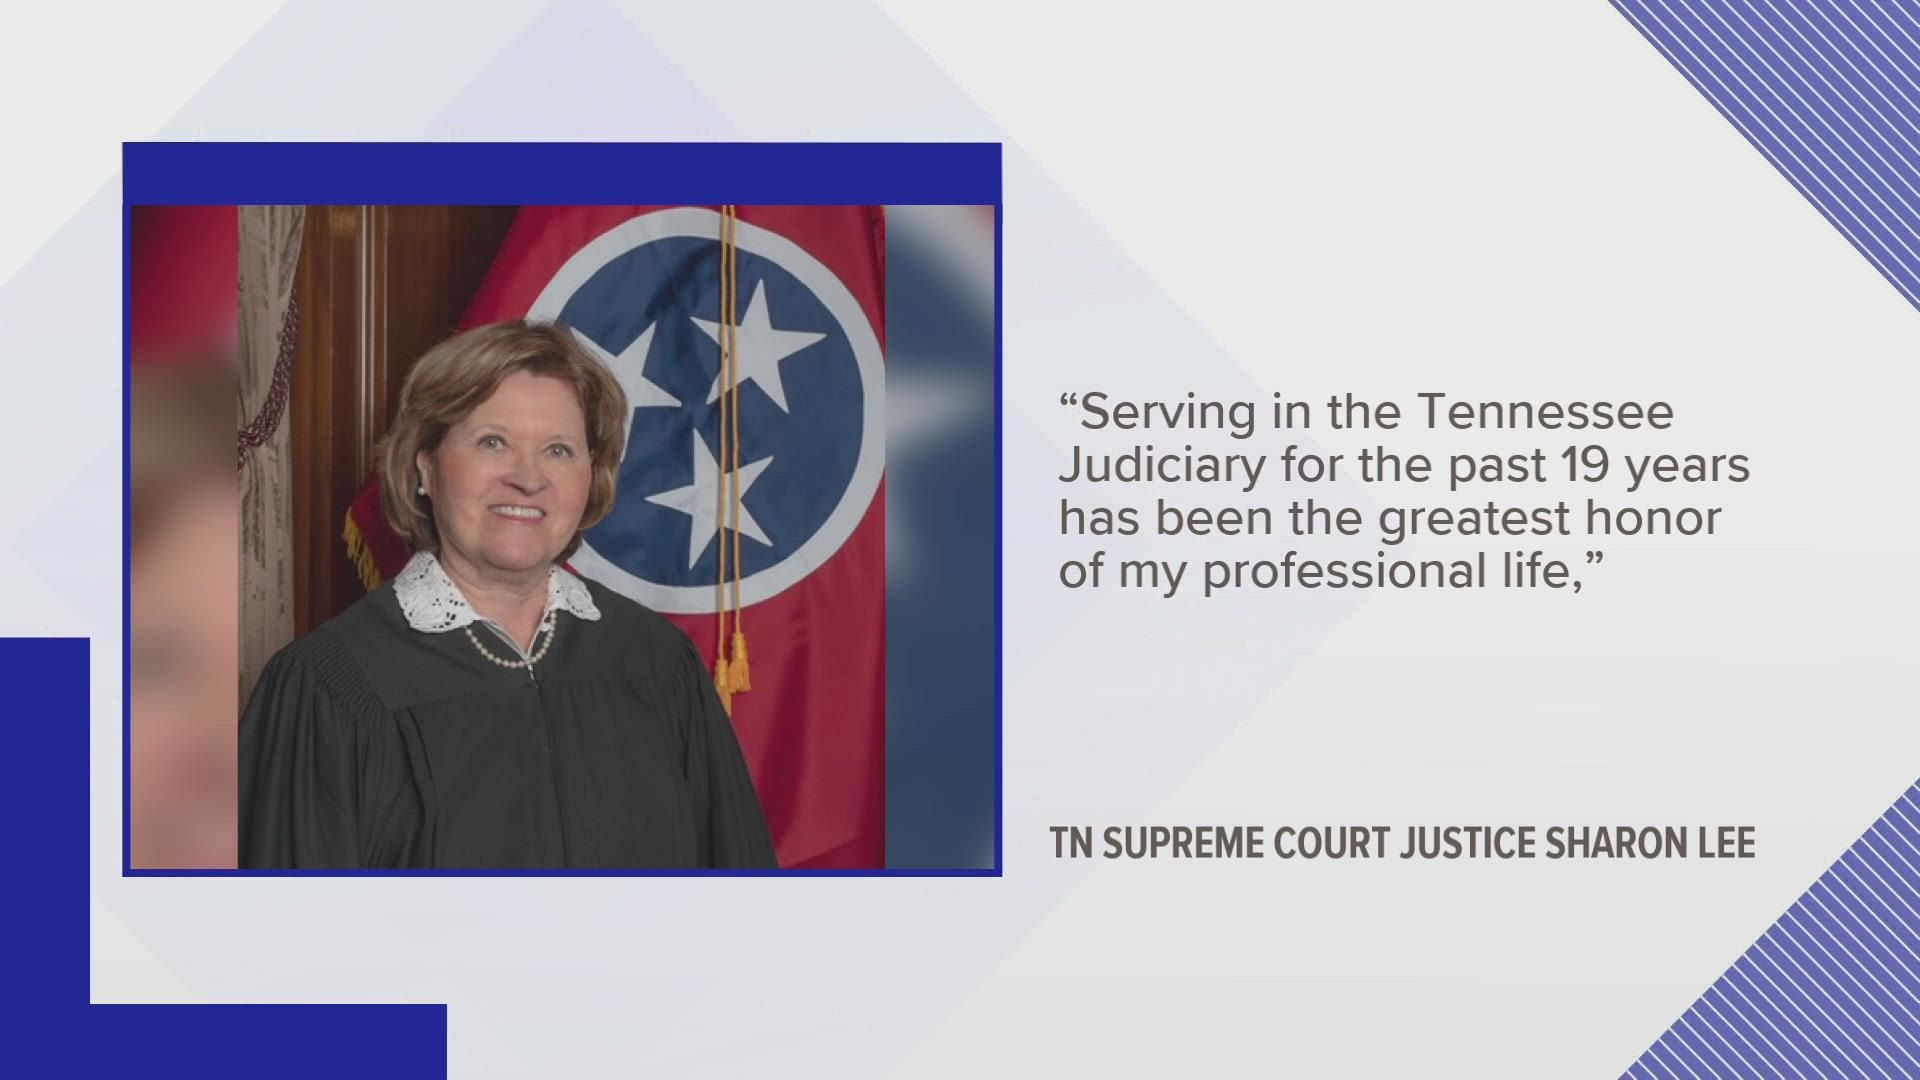 Lee is currently the longest-serving member of the Supreme Court and the only justice from East Tennessee.